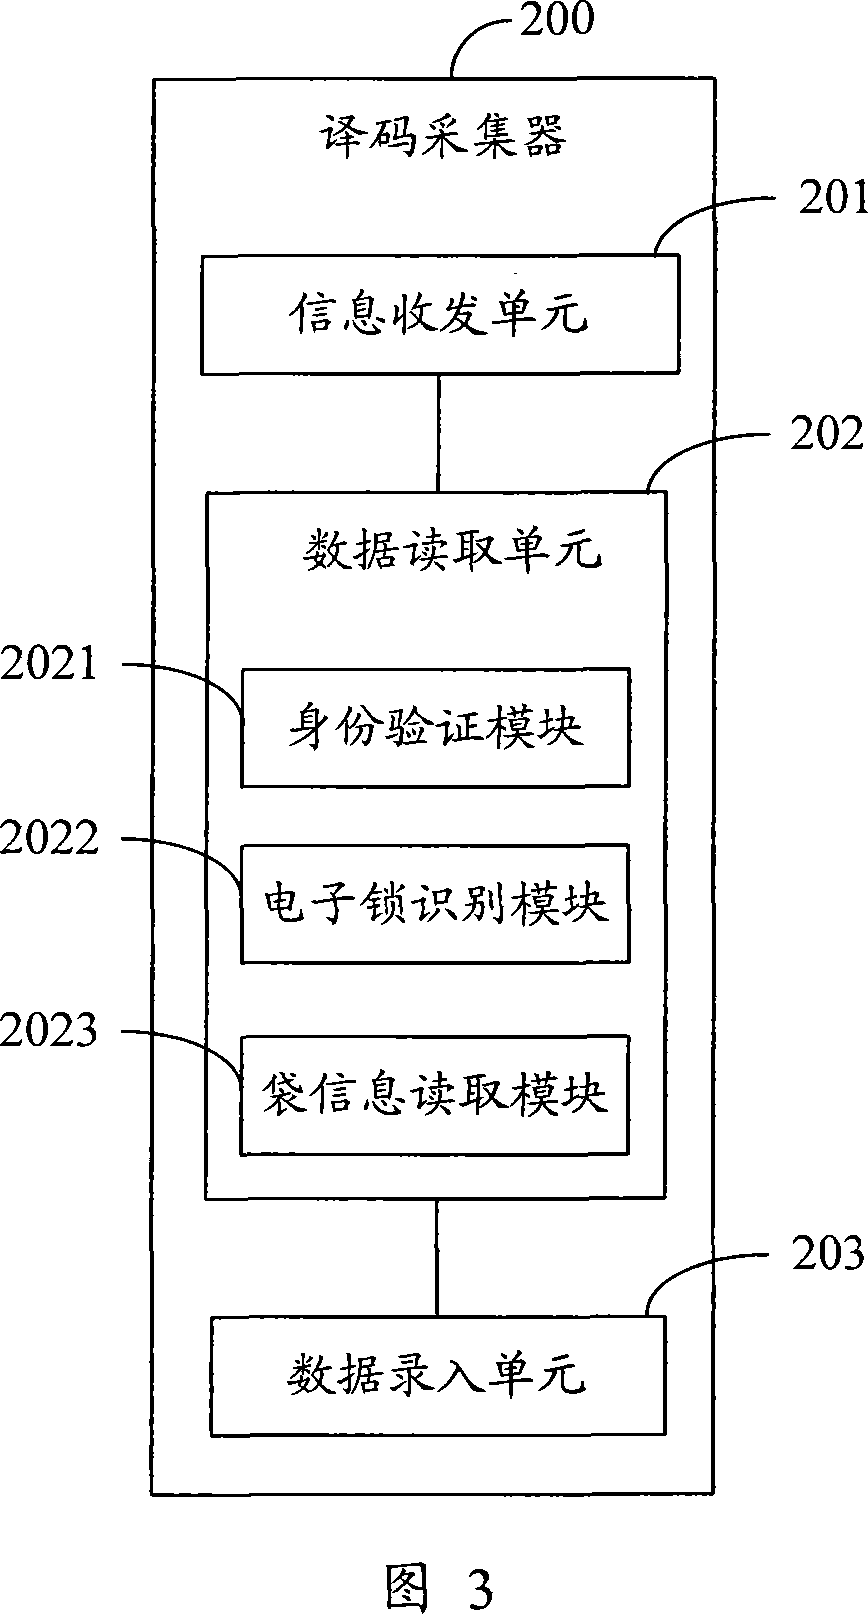 Method and system for controlling circulation of turnover bag